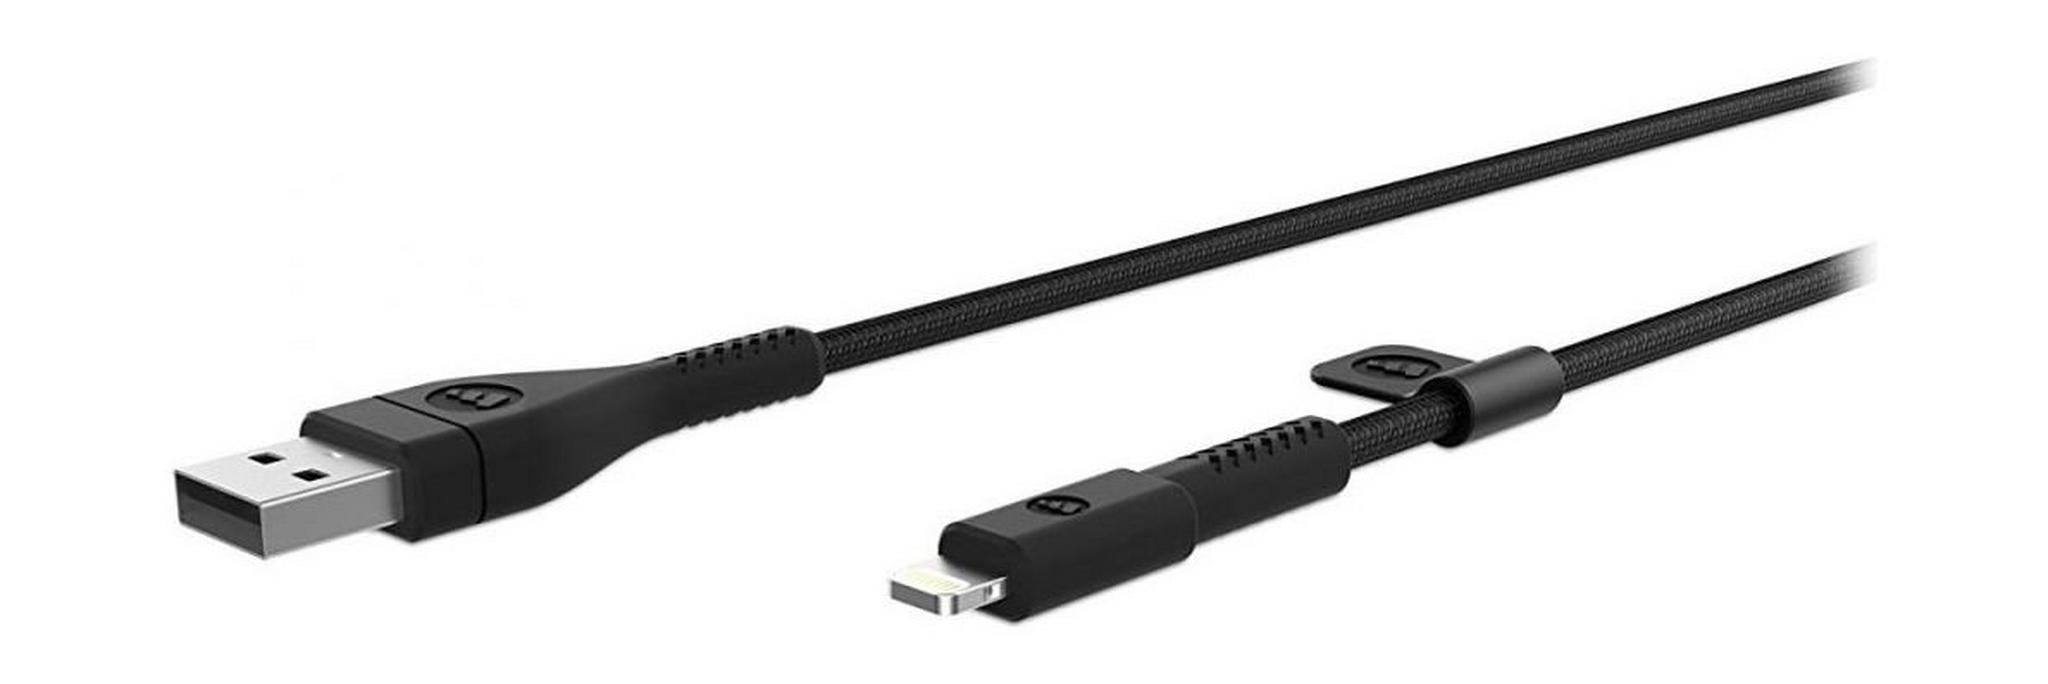 Mophie Pro Flat Lightning Cable 1.2M